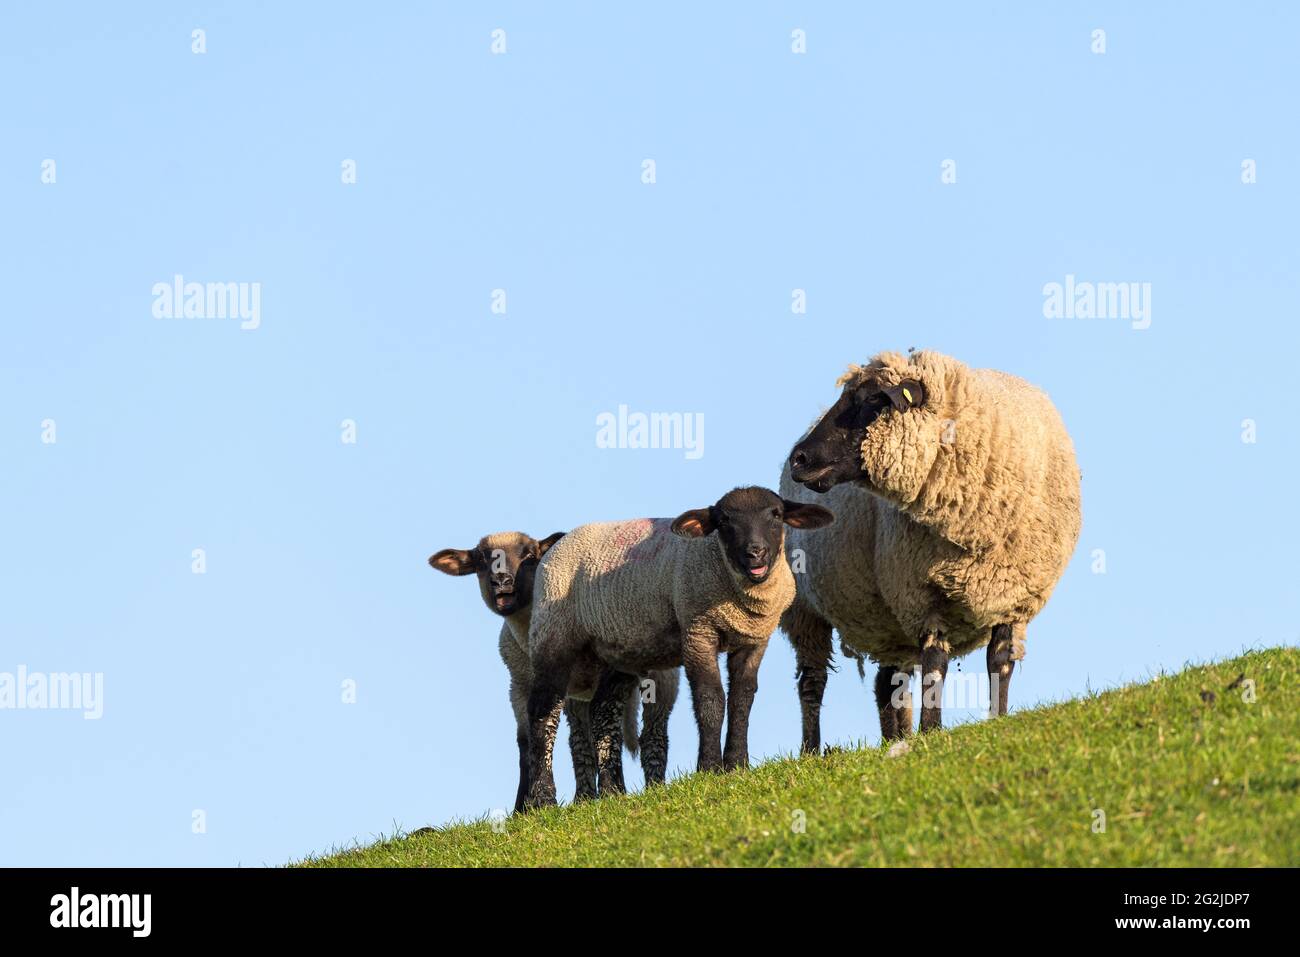 Sheep family on the dike, mother with two cubs, Westerhever, Eiderstedt peninsula, Schleswig-Holstein Wadden Sea National Park, Germany, Schleswig-Holstein, North Sea coast Stock Photo